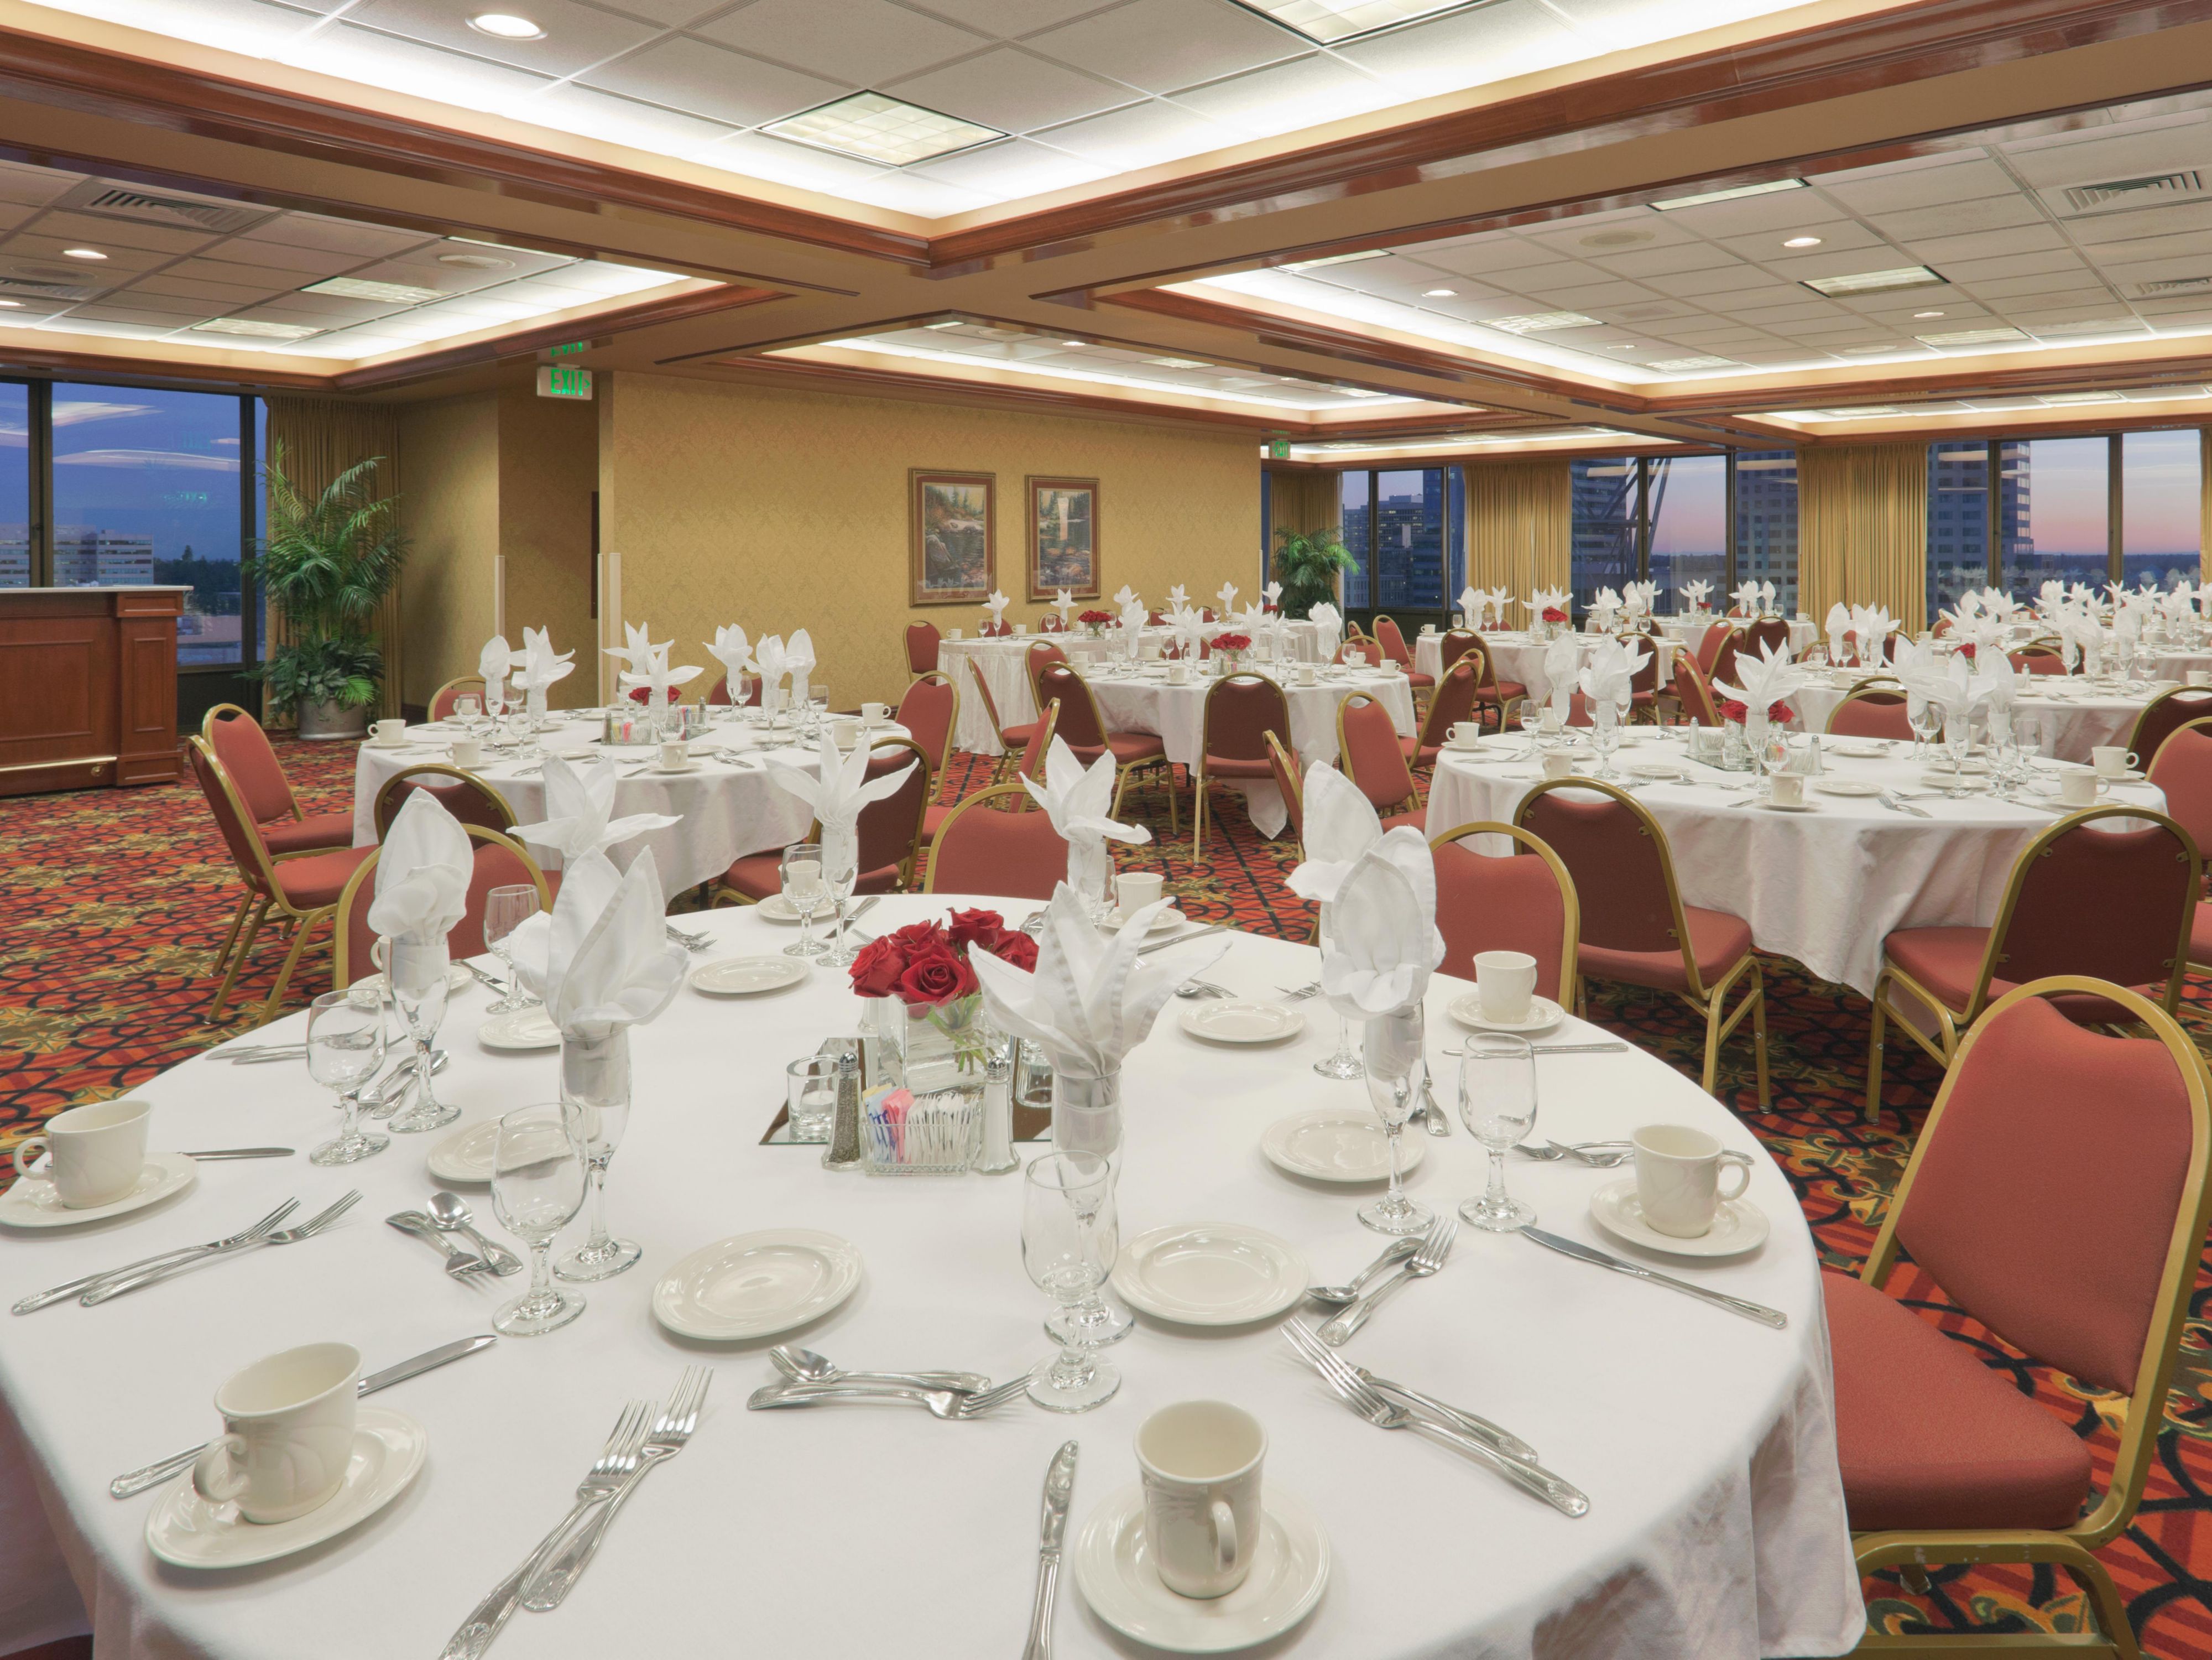 Connect with colleagues, celebrate with family, and get down to business in our 14 flexible event spaces in Sacramento. Our hotel features a delightful event catering menu and 13,000 sq. ft. of meeting and event space, including a boardroom and two elegant ballrooms for up to 1,000 guests, the ideal venue for a beautiful wedding.  